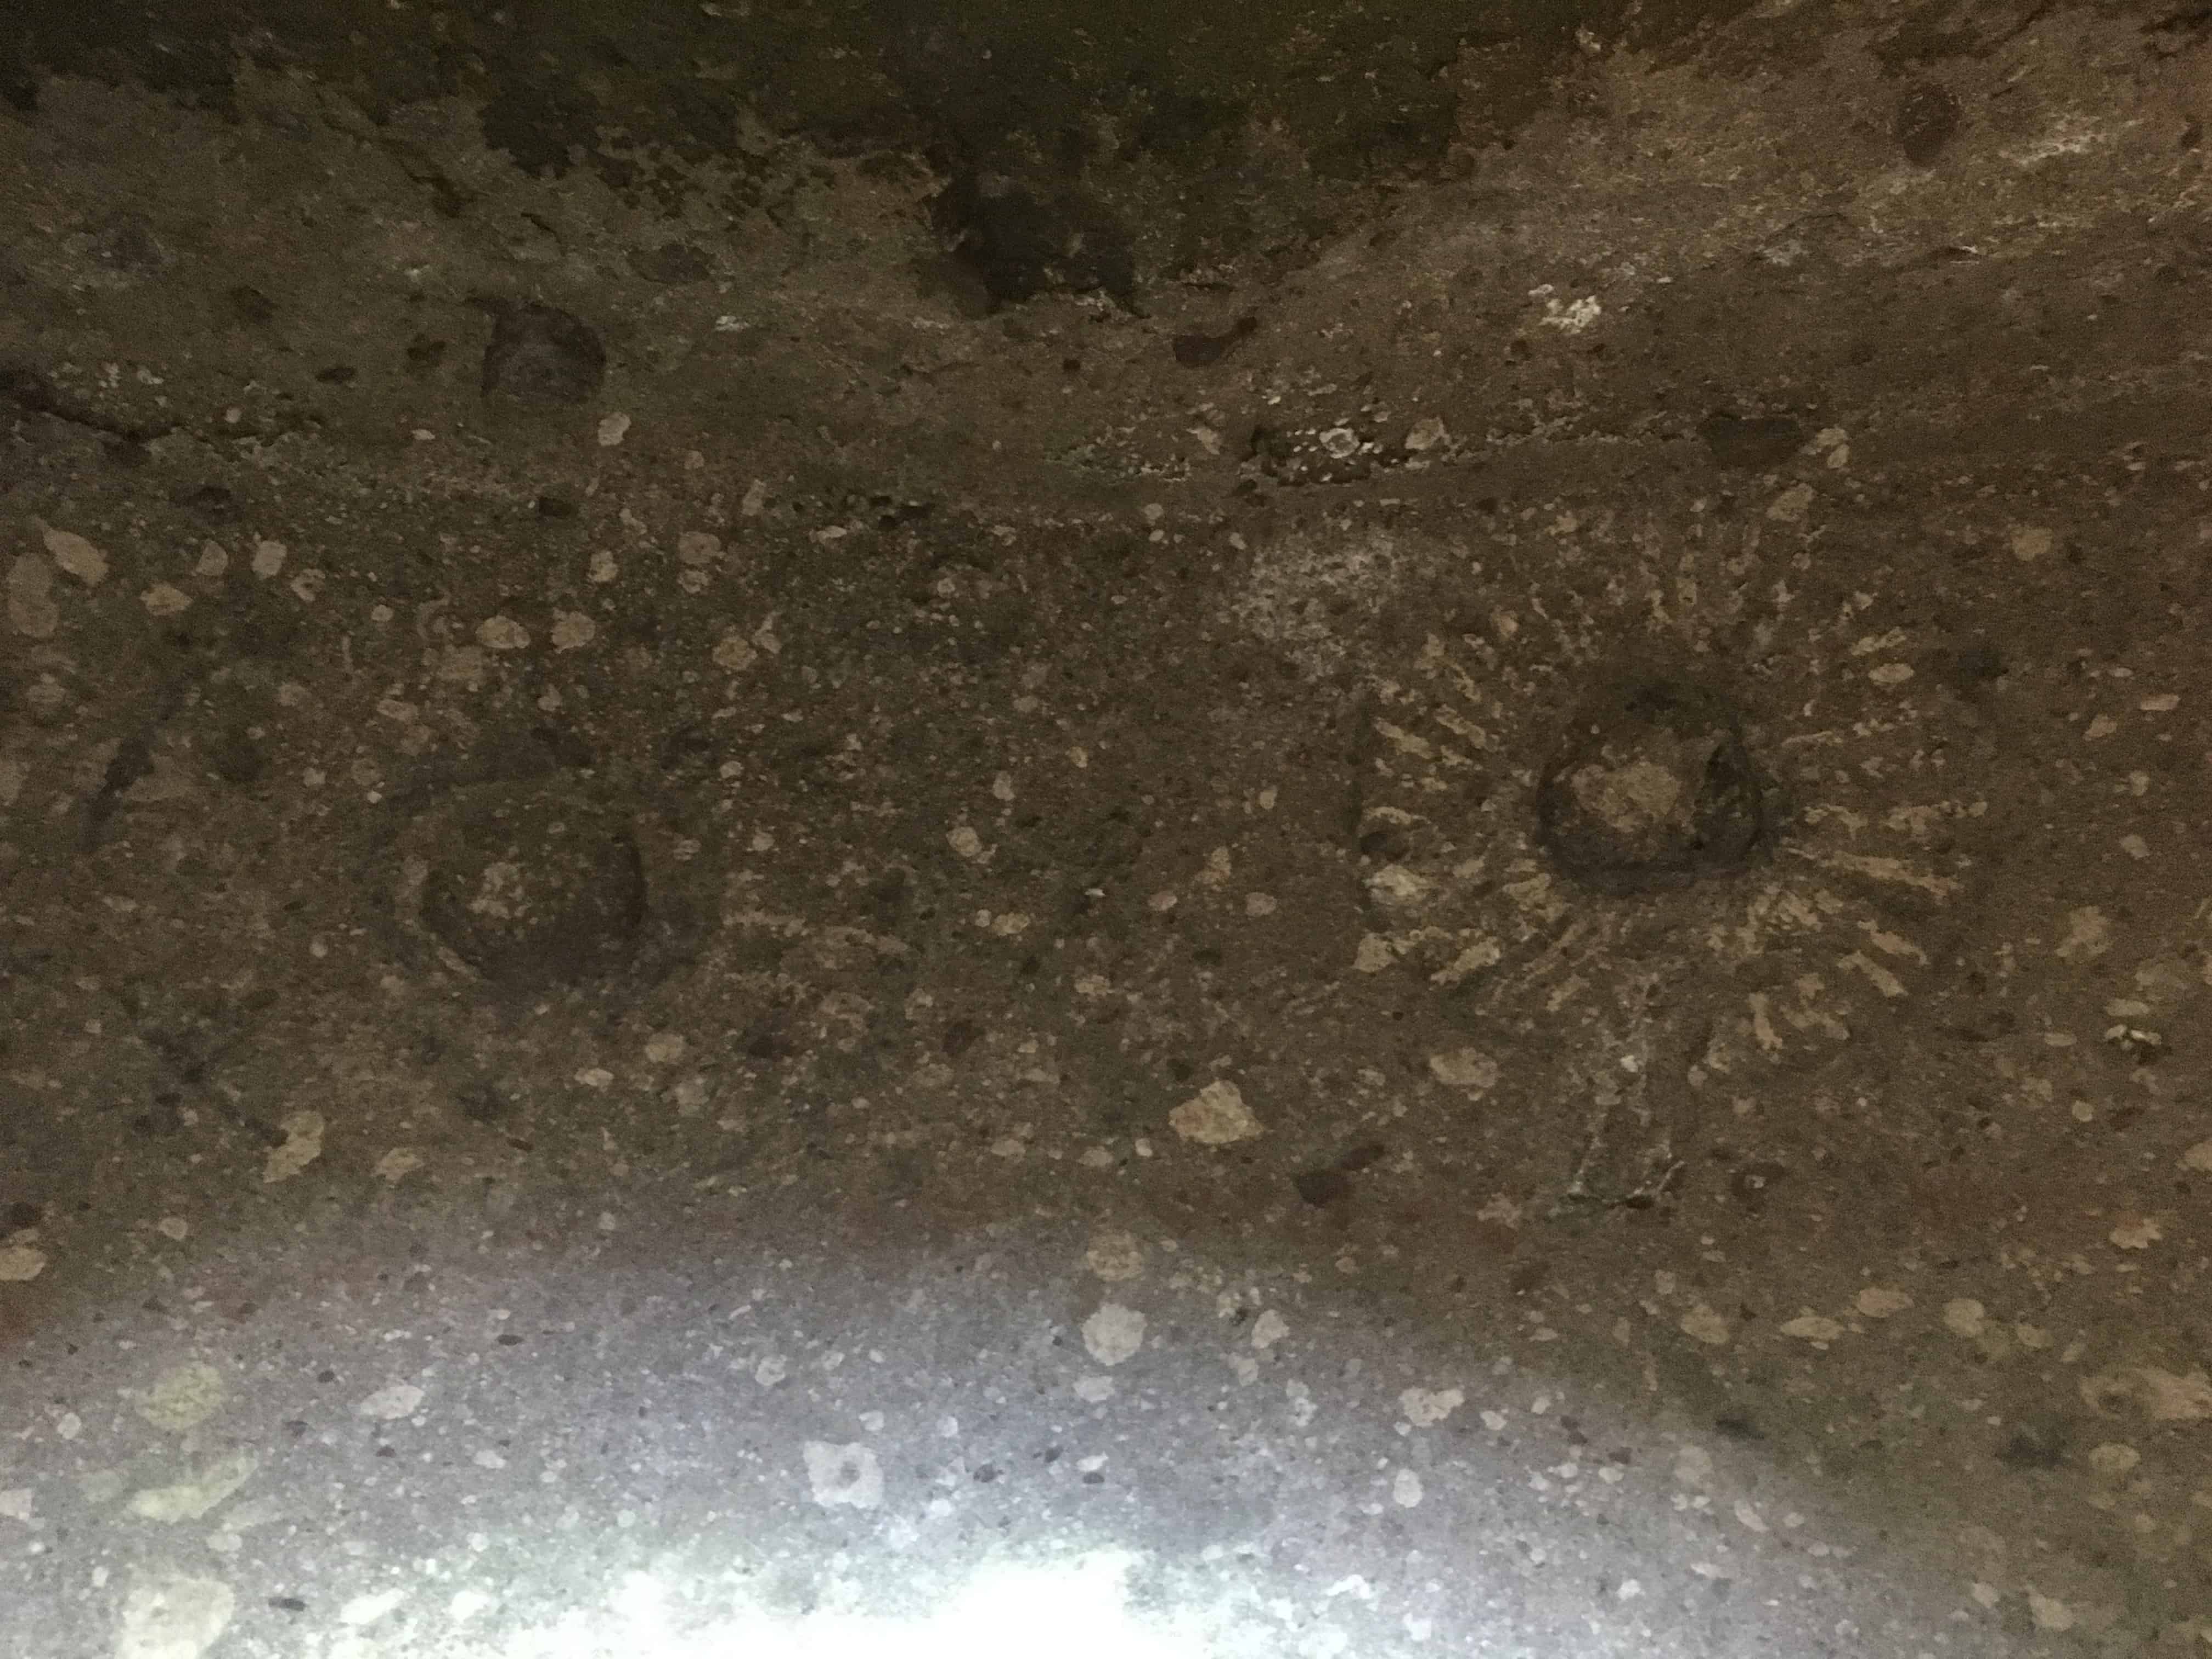 Representation of the sun and moon in a tomb at El Aguacate at Tierradentro, Cauca, Colombia